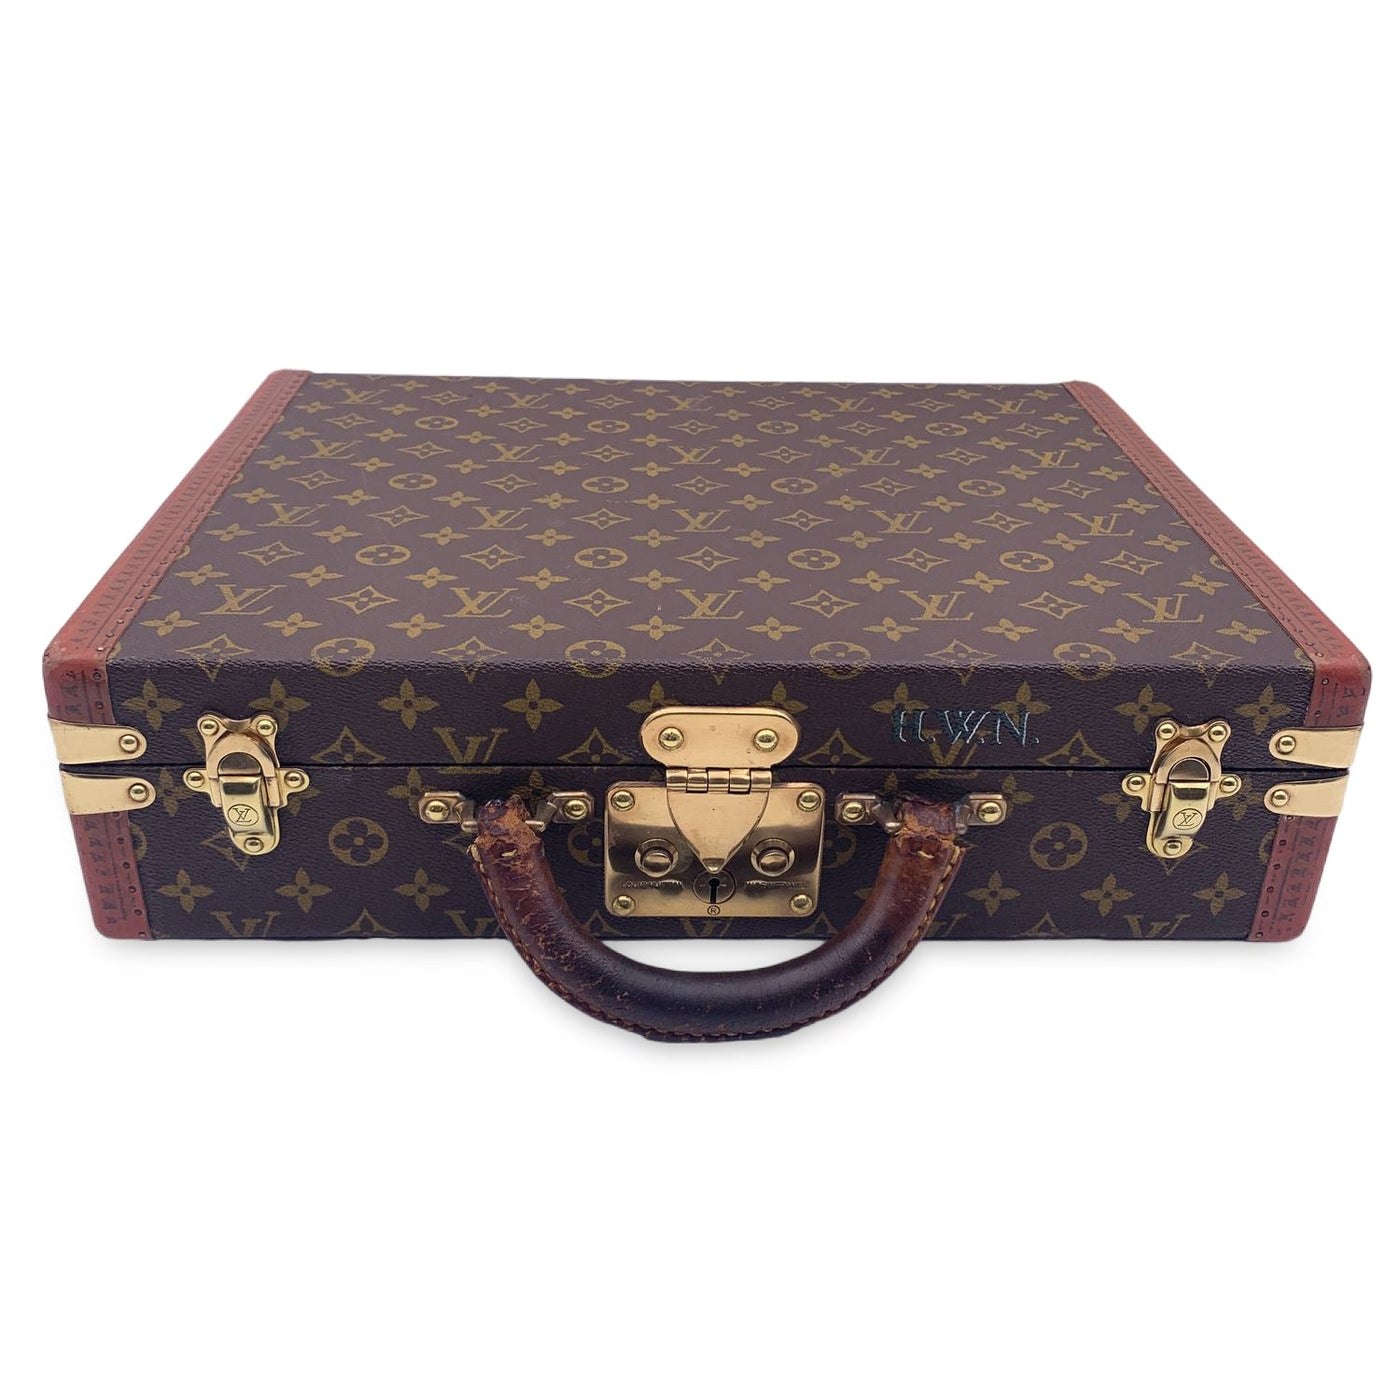 Vintage French President Briefcase in Monogram Canvas from Louis